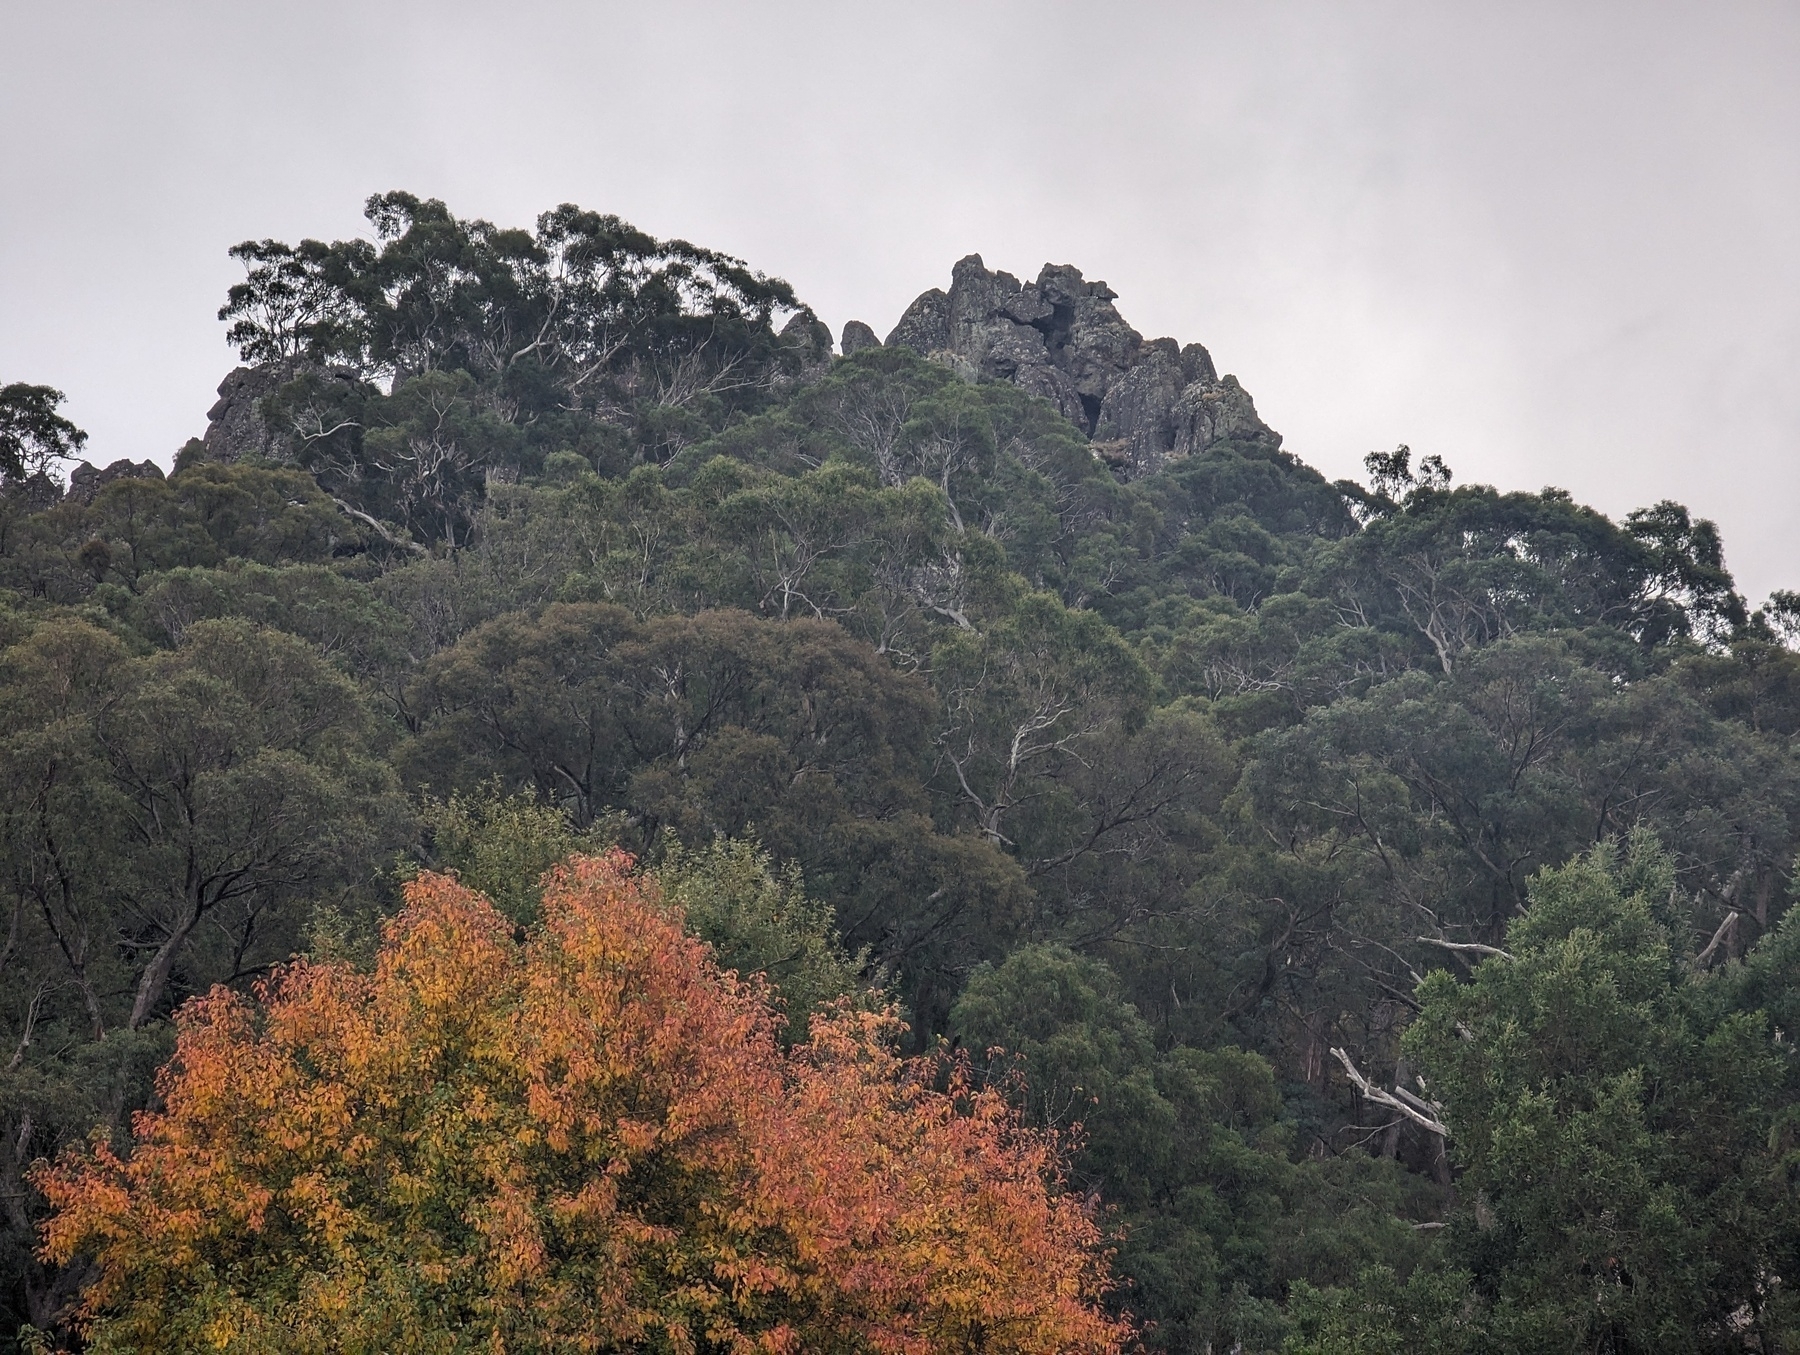 Hanging Rock. A rocky outcrop peeks through a dense forest with trees displaying hints of autumnal coloration under a cloudy sky.